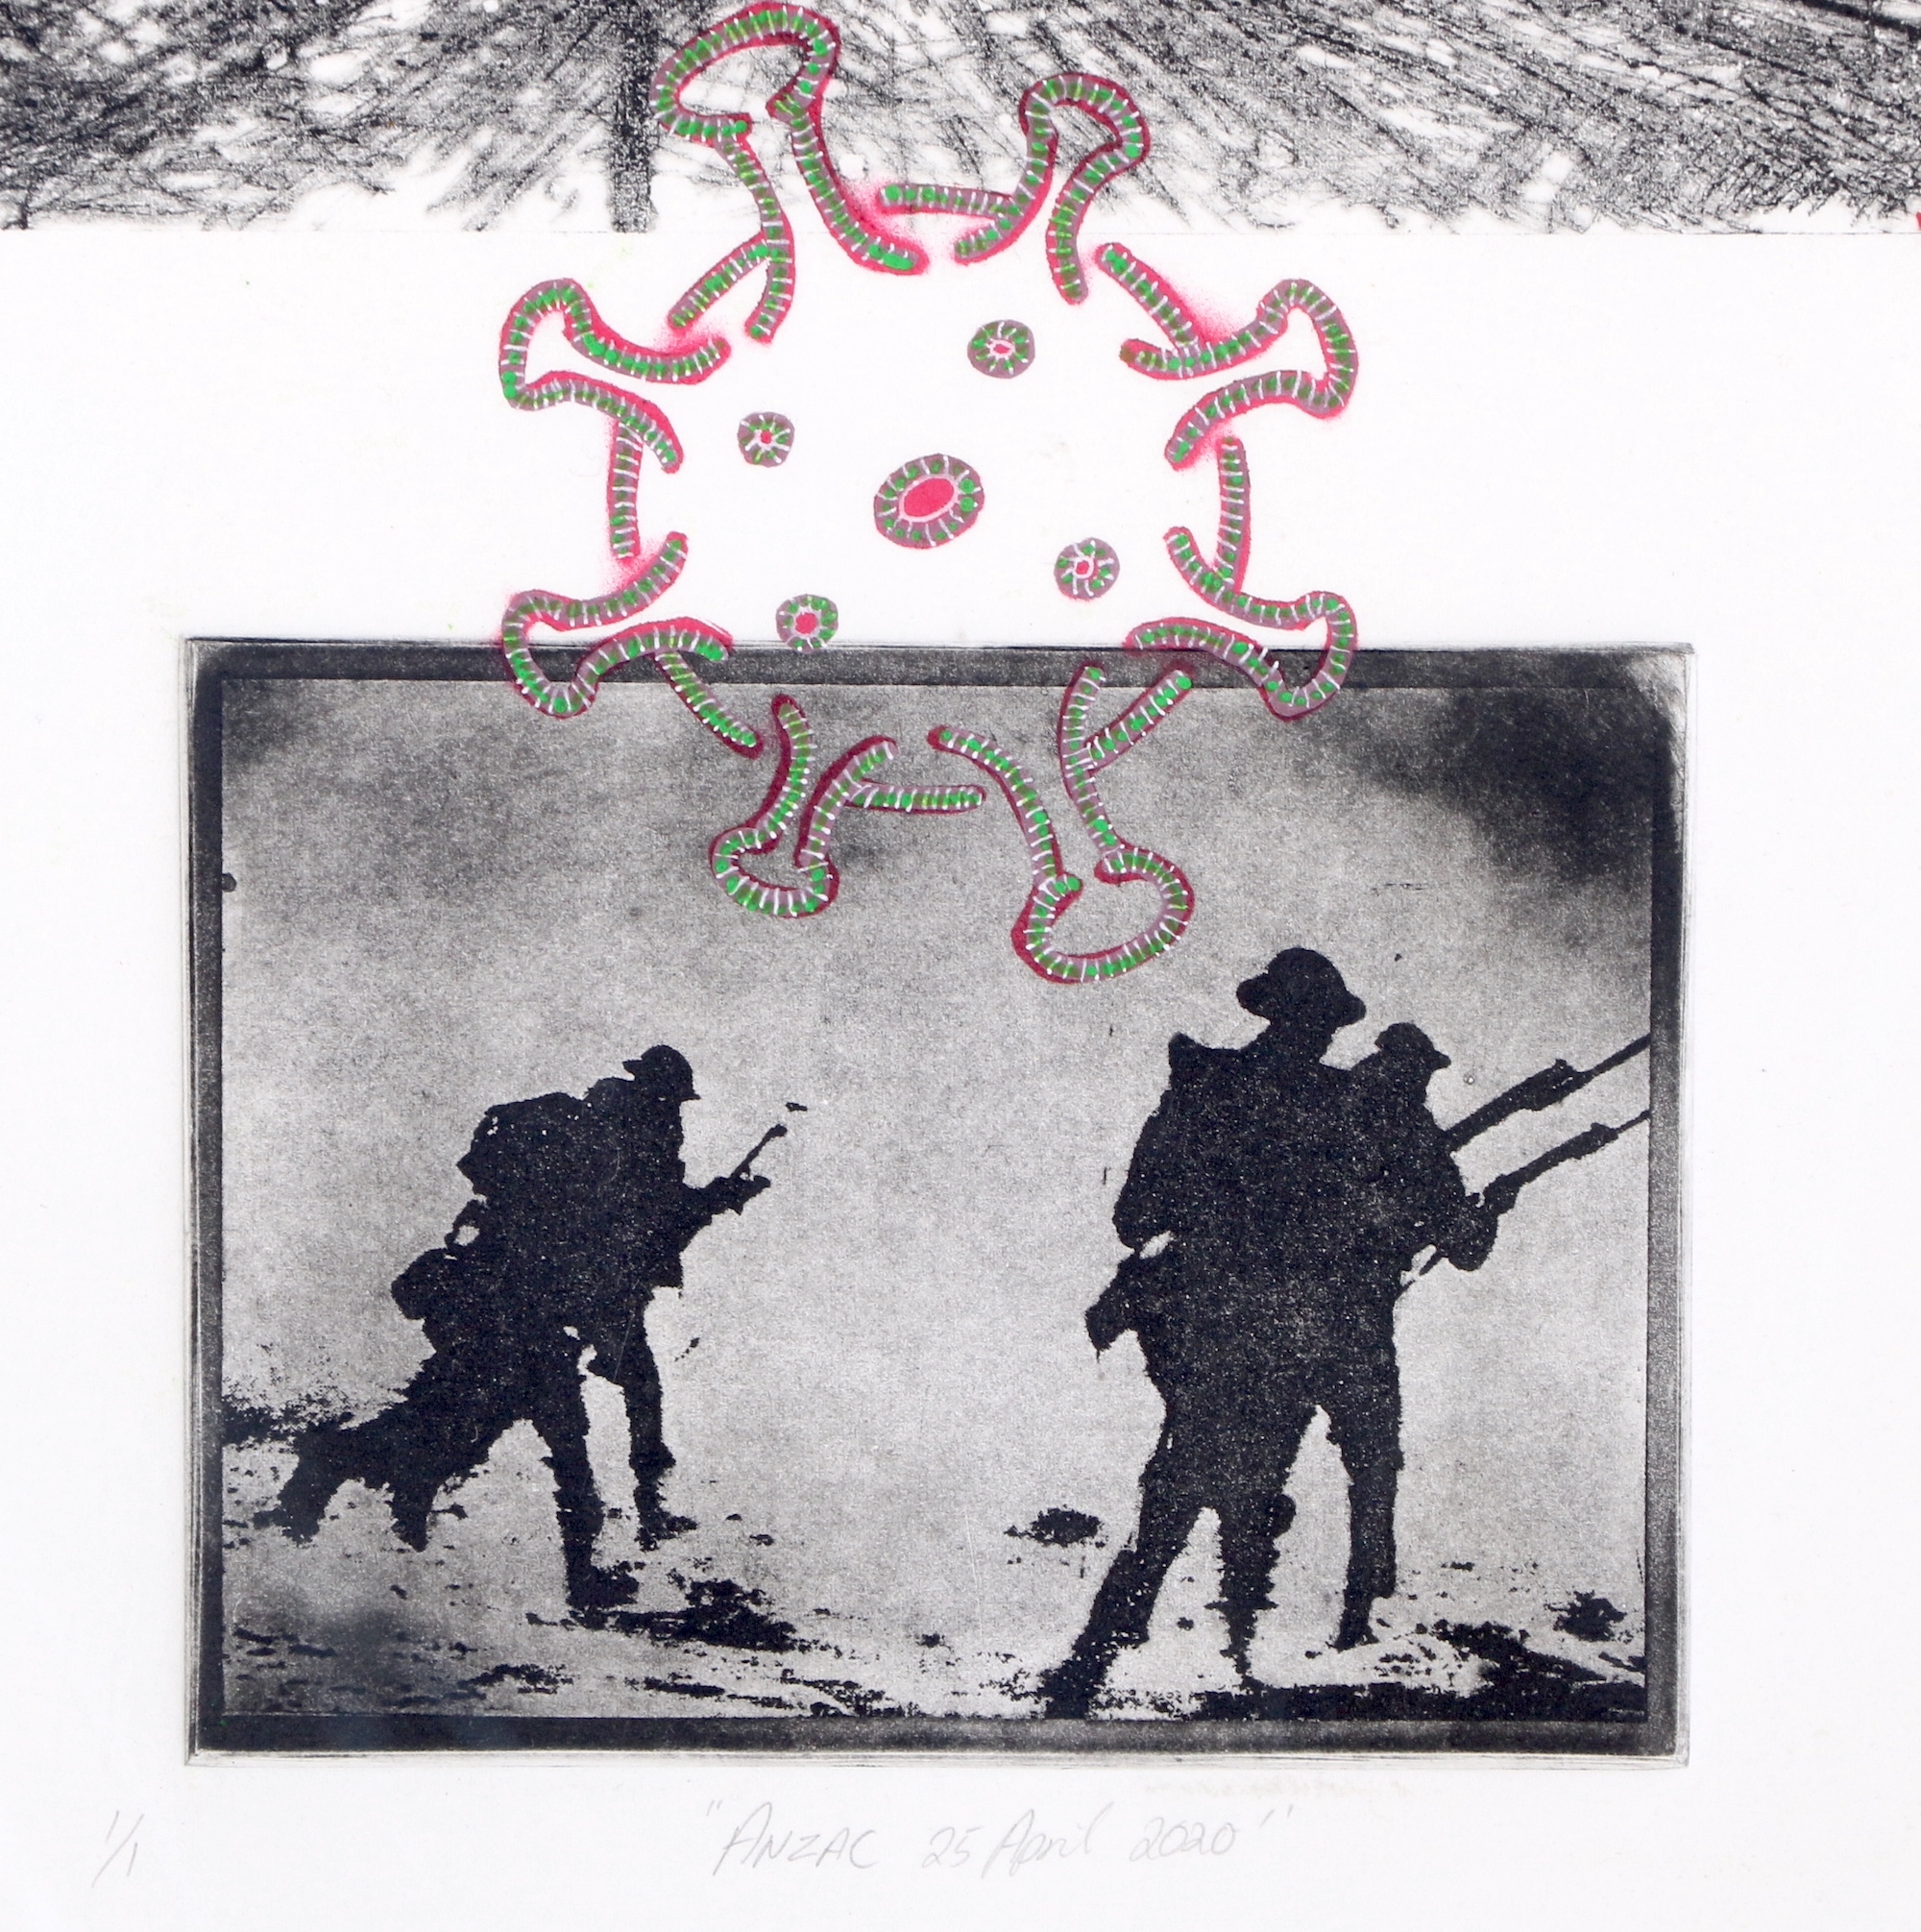 Artwork by Collin Cole, Dina Kroon, ANZAC 25 APRIL 2020, Made of drypoint